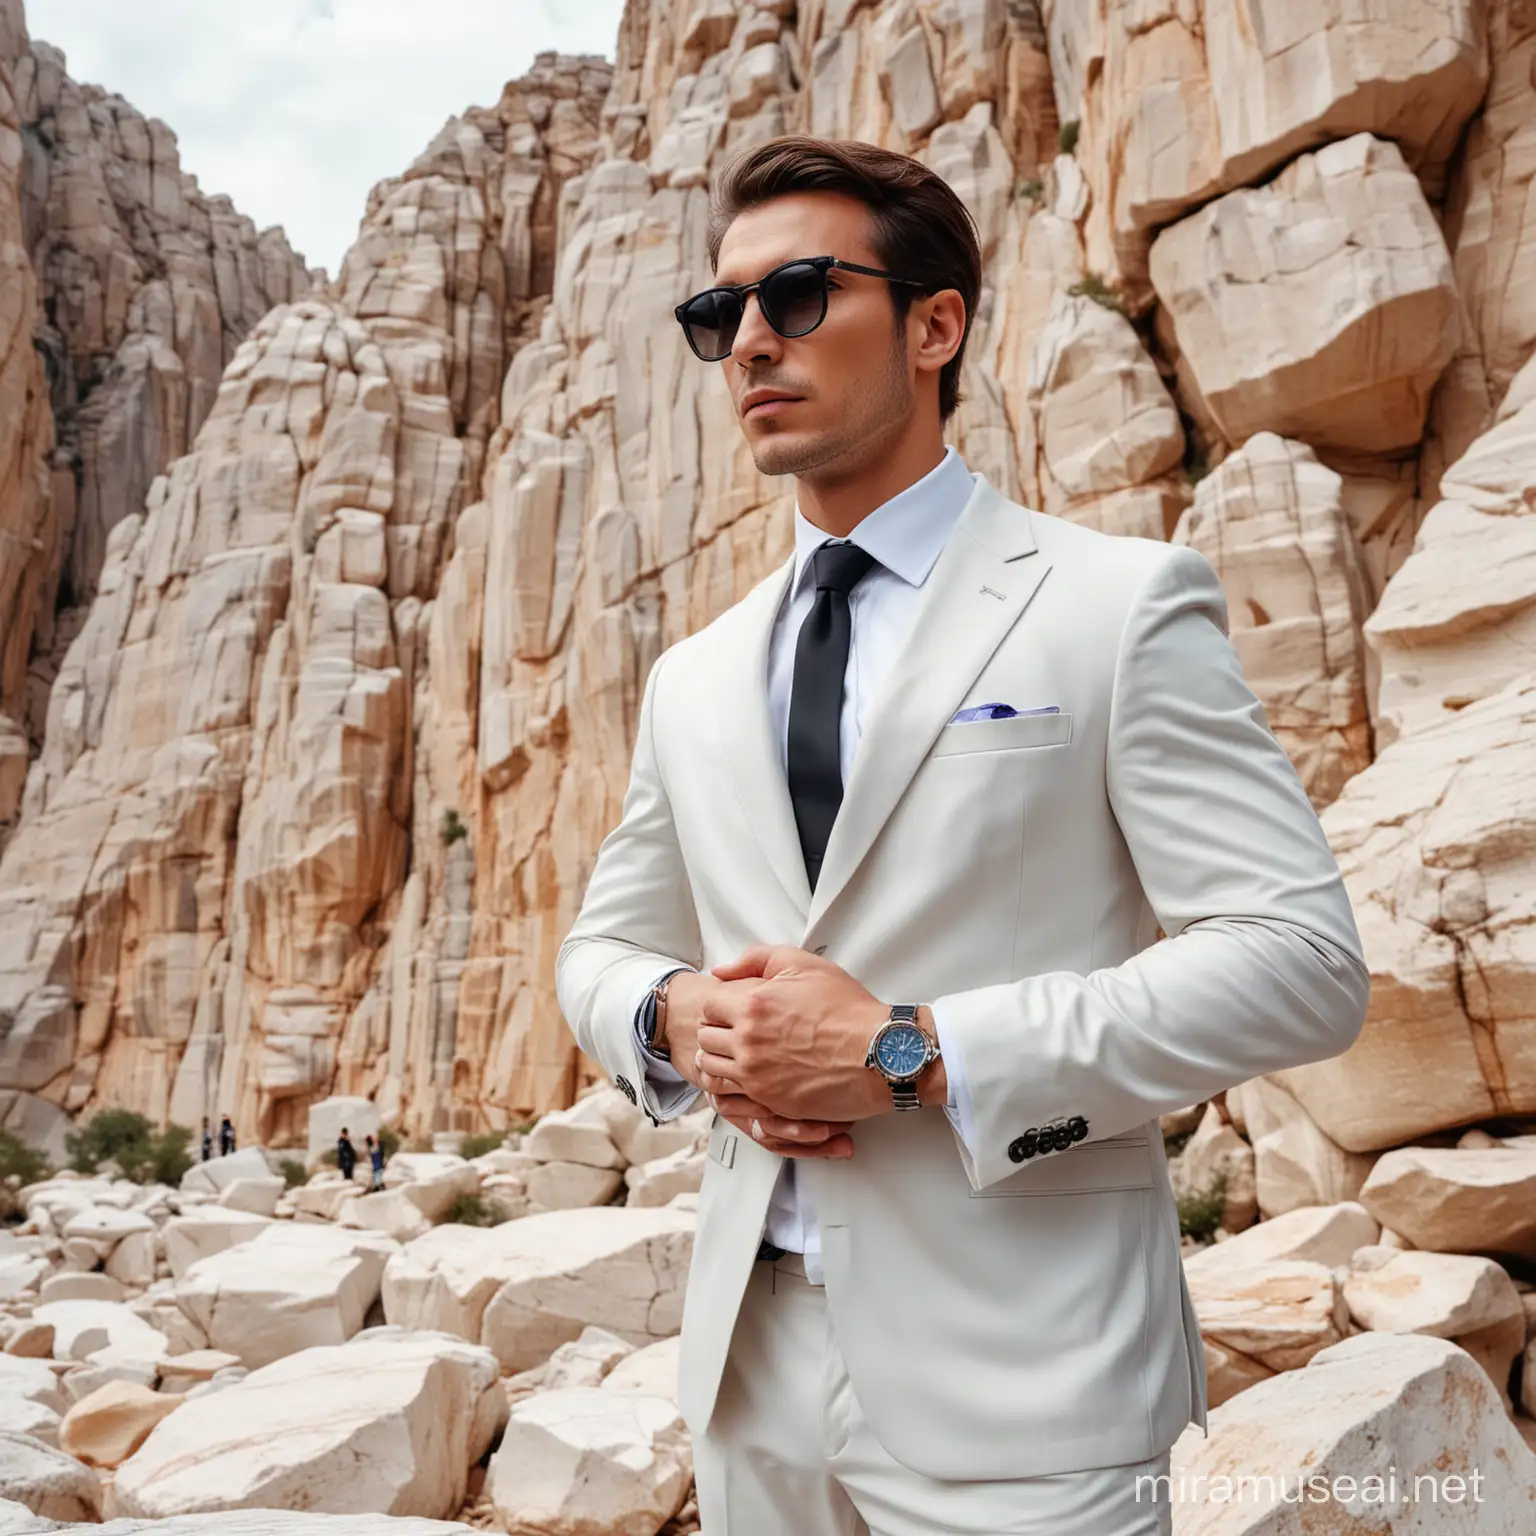 Personal Marble Advisor in a suit and one expensive watch, wearing tinted glasses and standing on a on the background of marble rocks